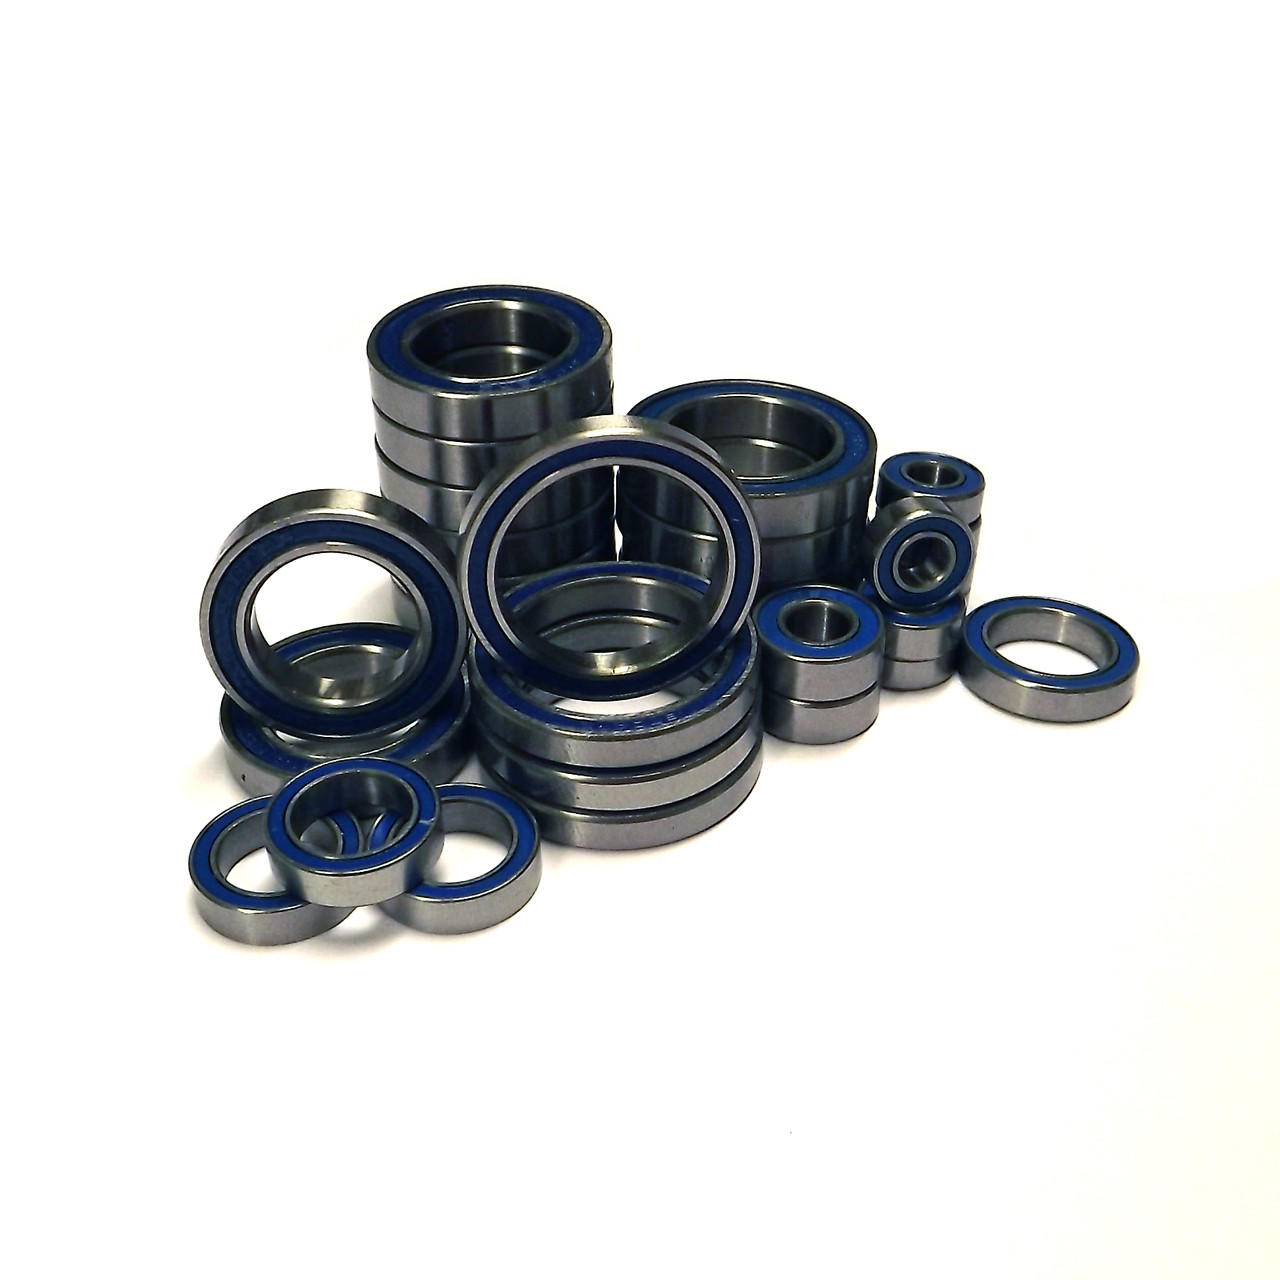 FOR TRAXXAS X-MAXX 8S or 6S complete rubber sealed bearing kit.  Comes with a full 35+4 pieces and replaces all bearings on your truck. Now adding 4 extra oversized 20x32x7mm bearings for the oversized Traxxas or RPM hubs! 